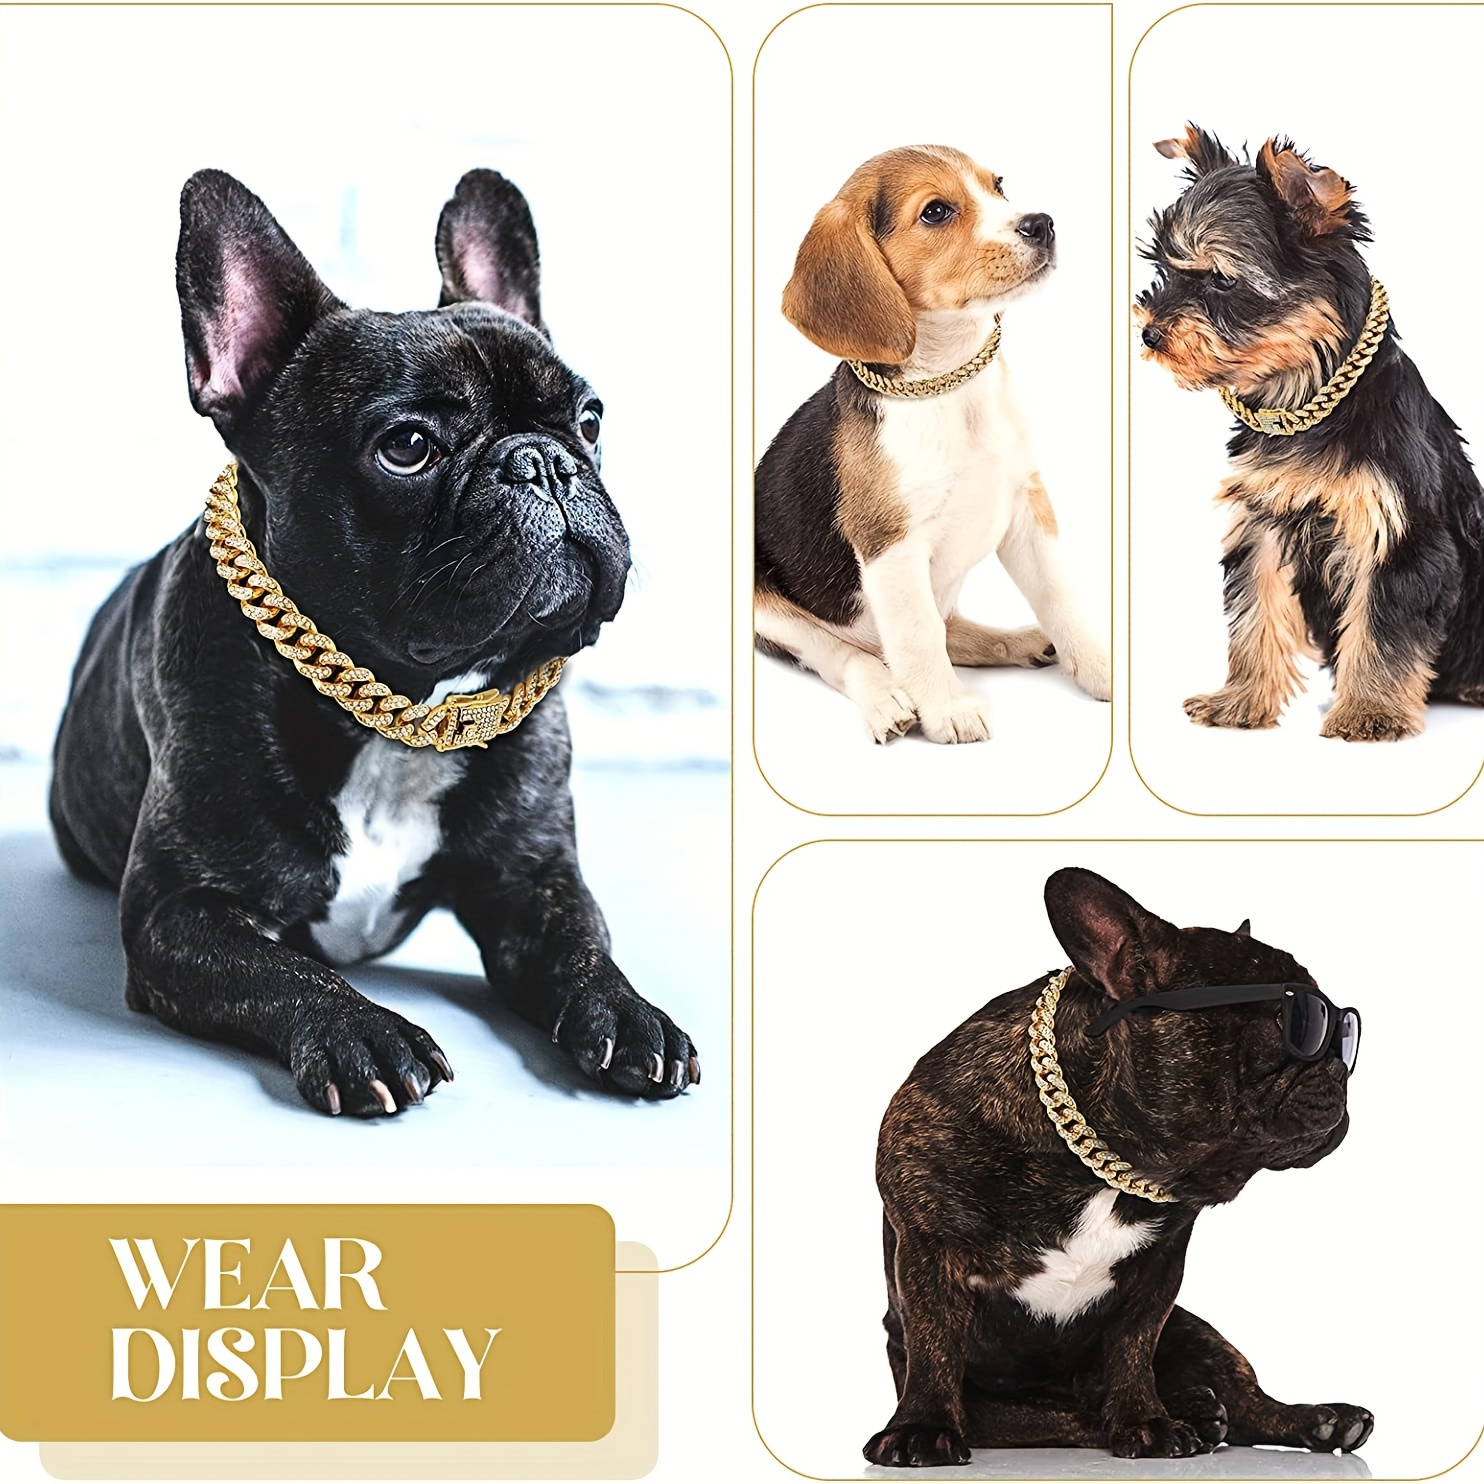 

Sparkling Diamond Cuban Chain Collar For Dogs - Secure Buckle & Walking Metal Chain Design